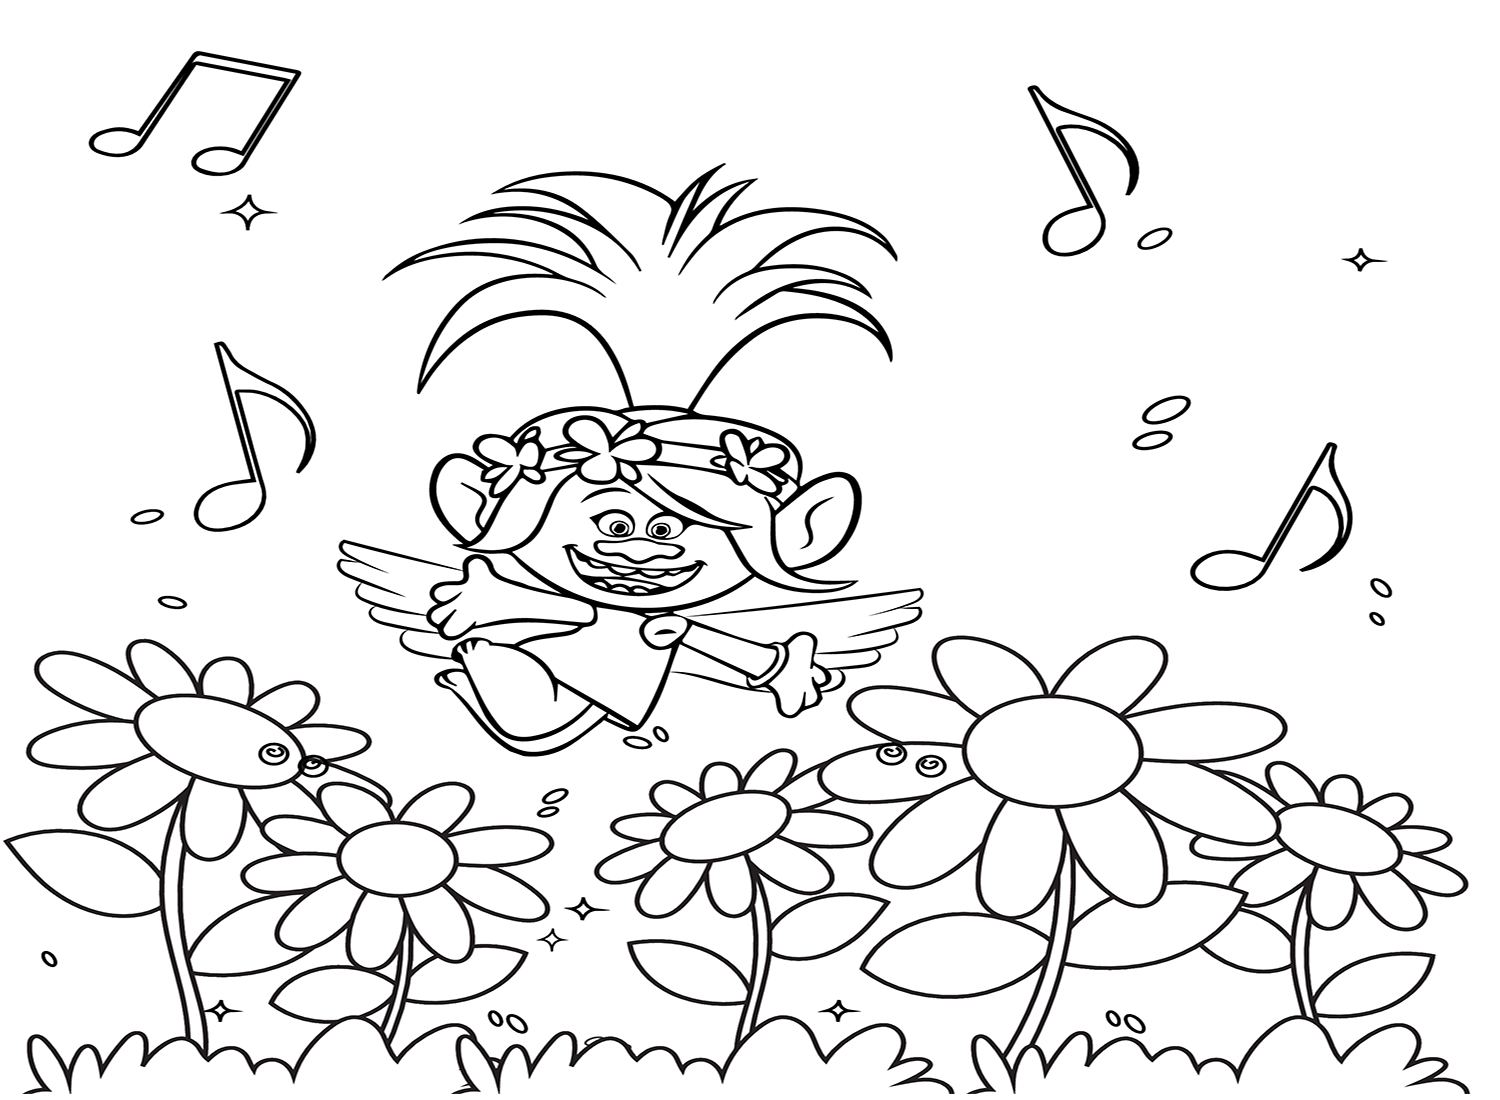 Trolls World Tour Movie Coloring Page